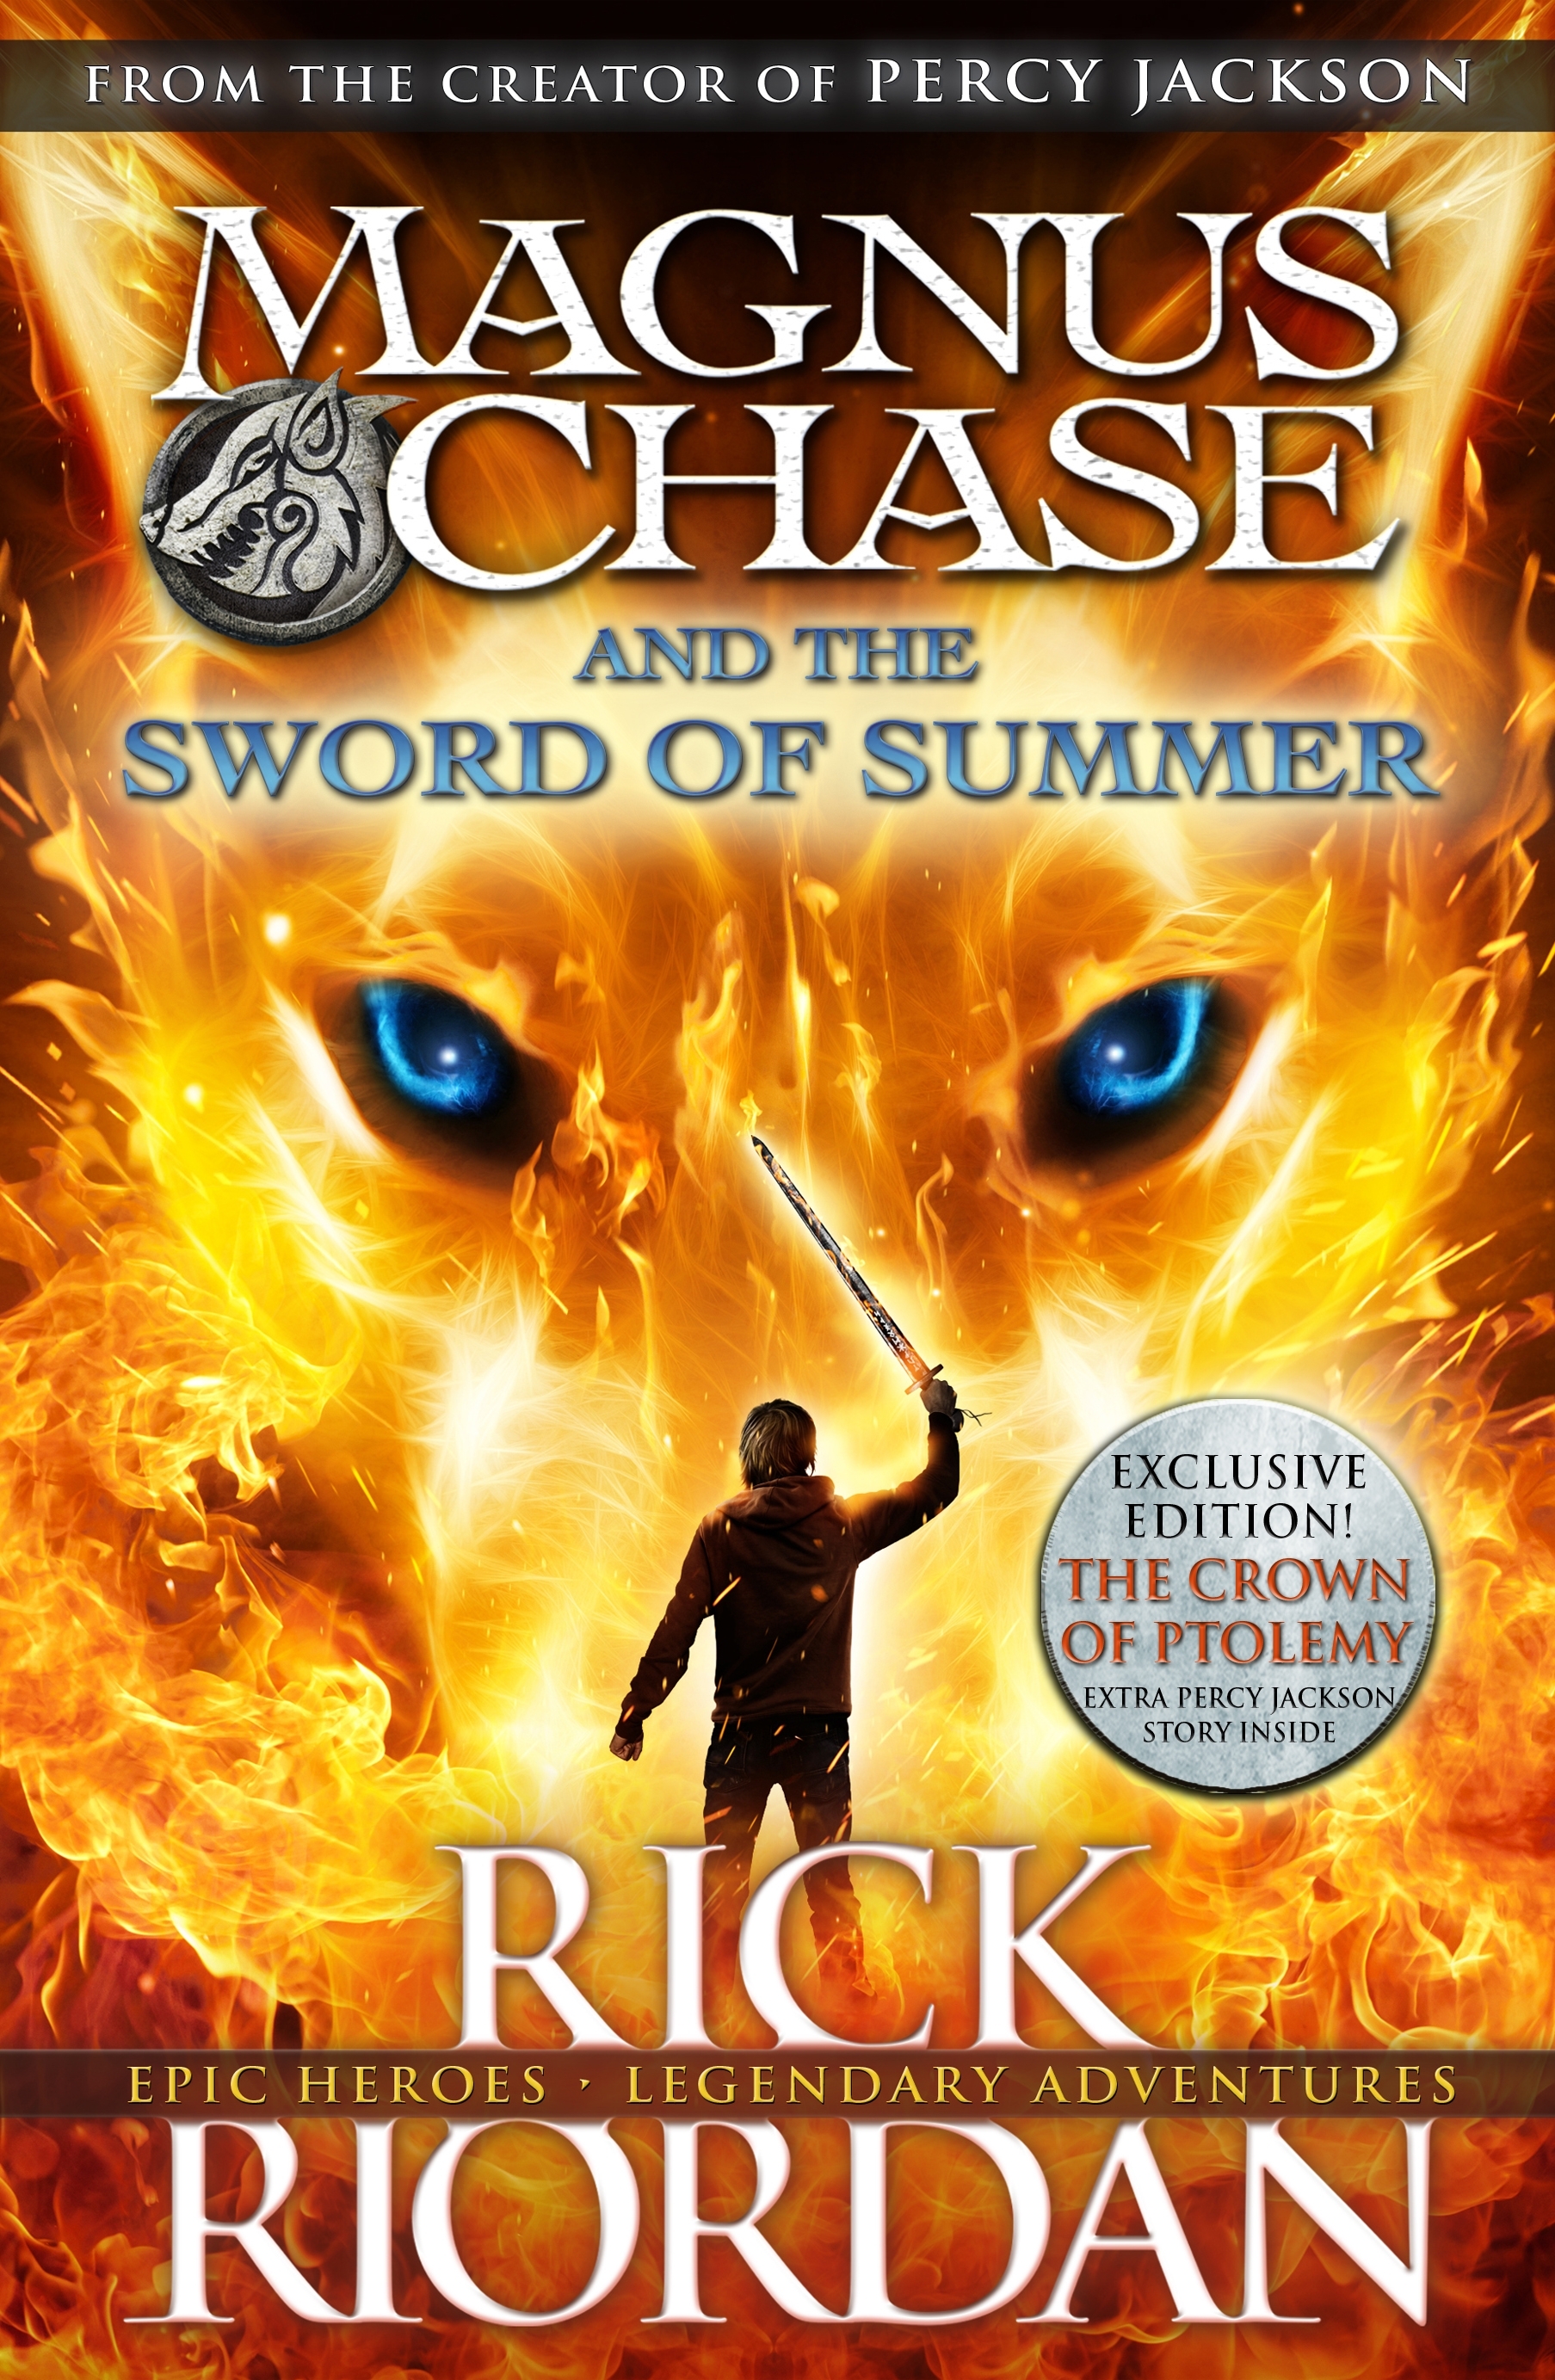 MAGNUS CHASE AND THE SWORD OF SUMMER